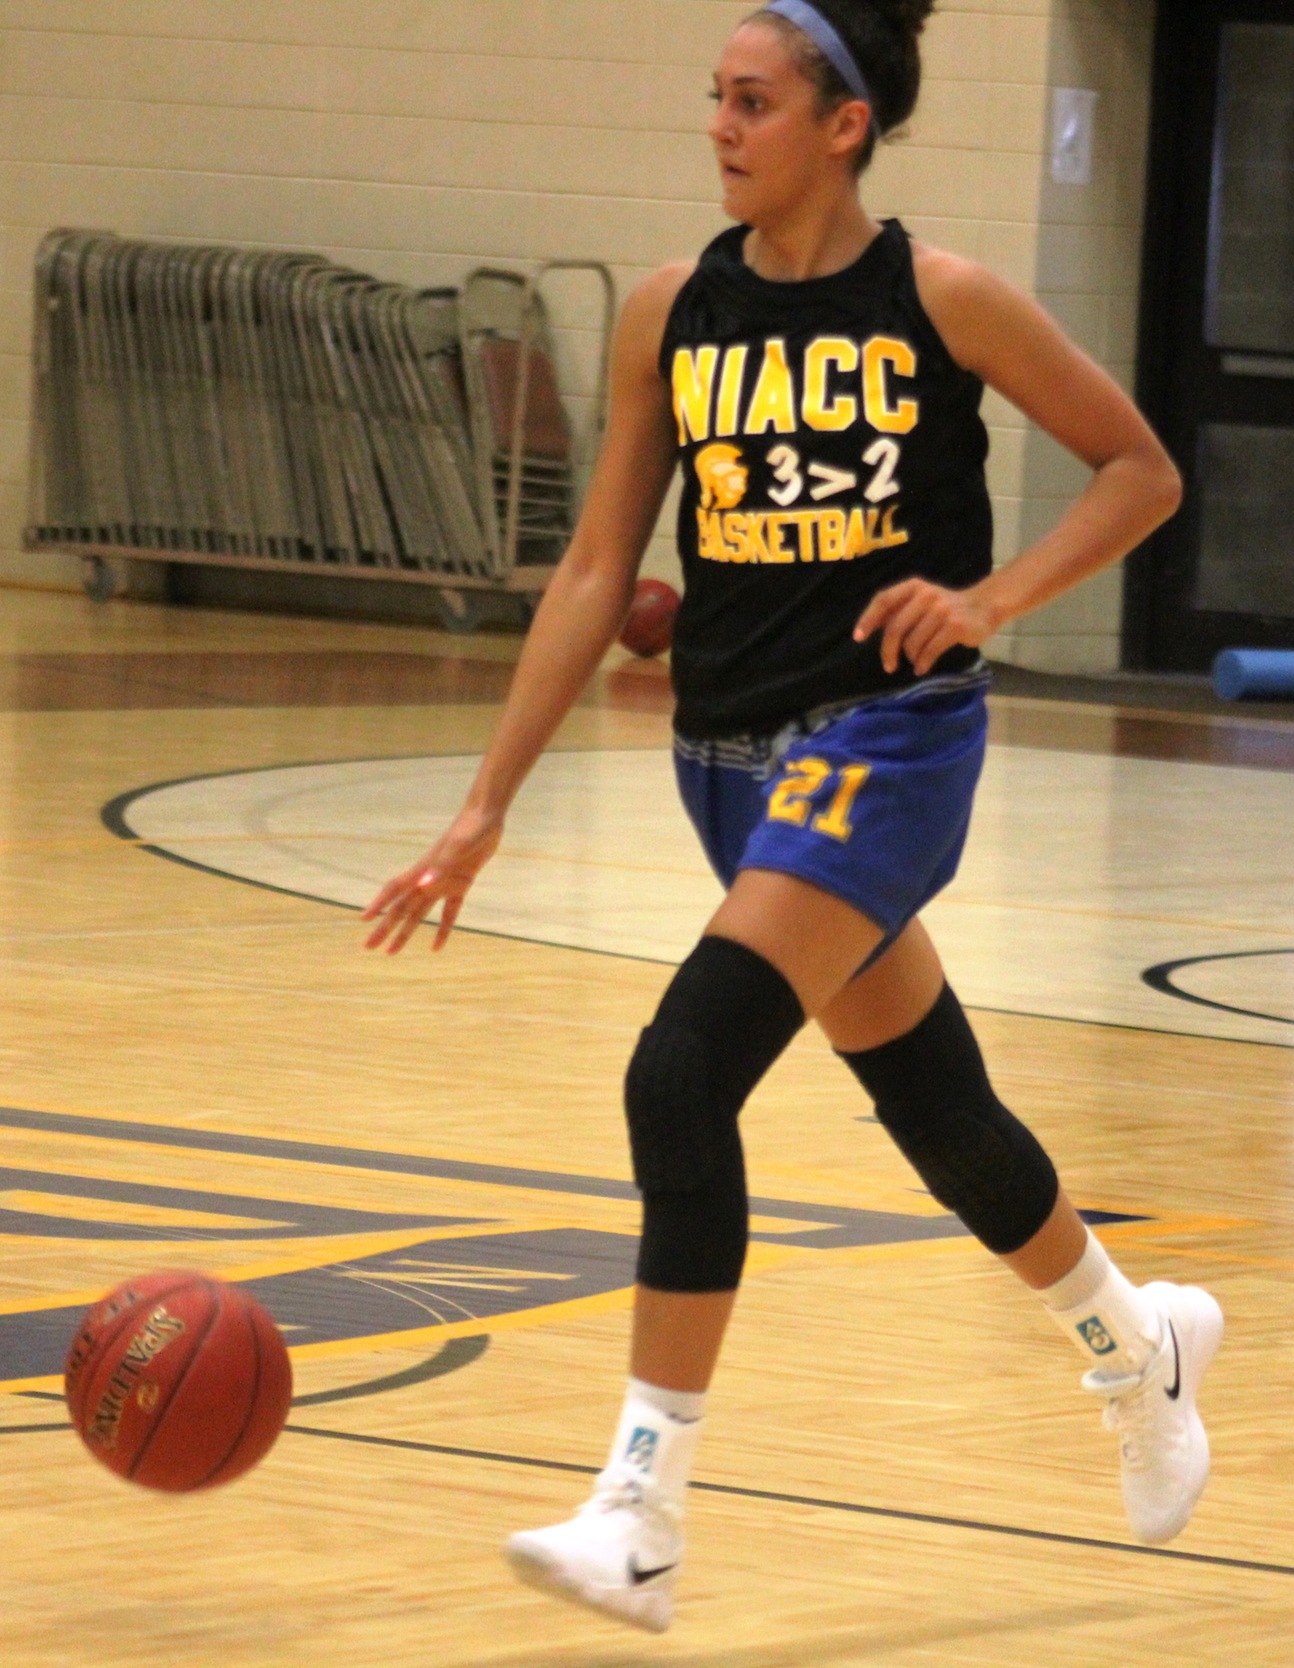 NIACC's Laker Ward dribble the ball up court in a recent practice.